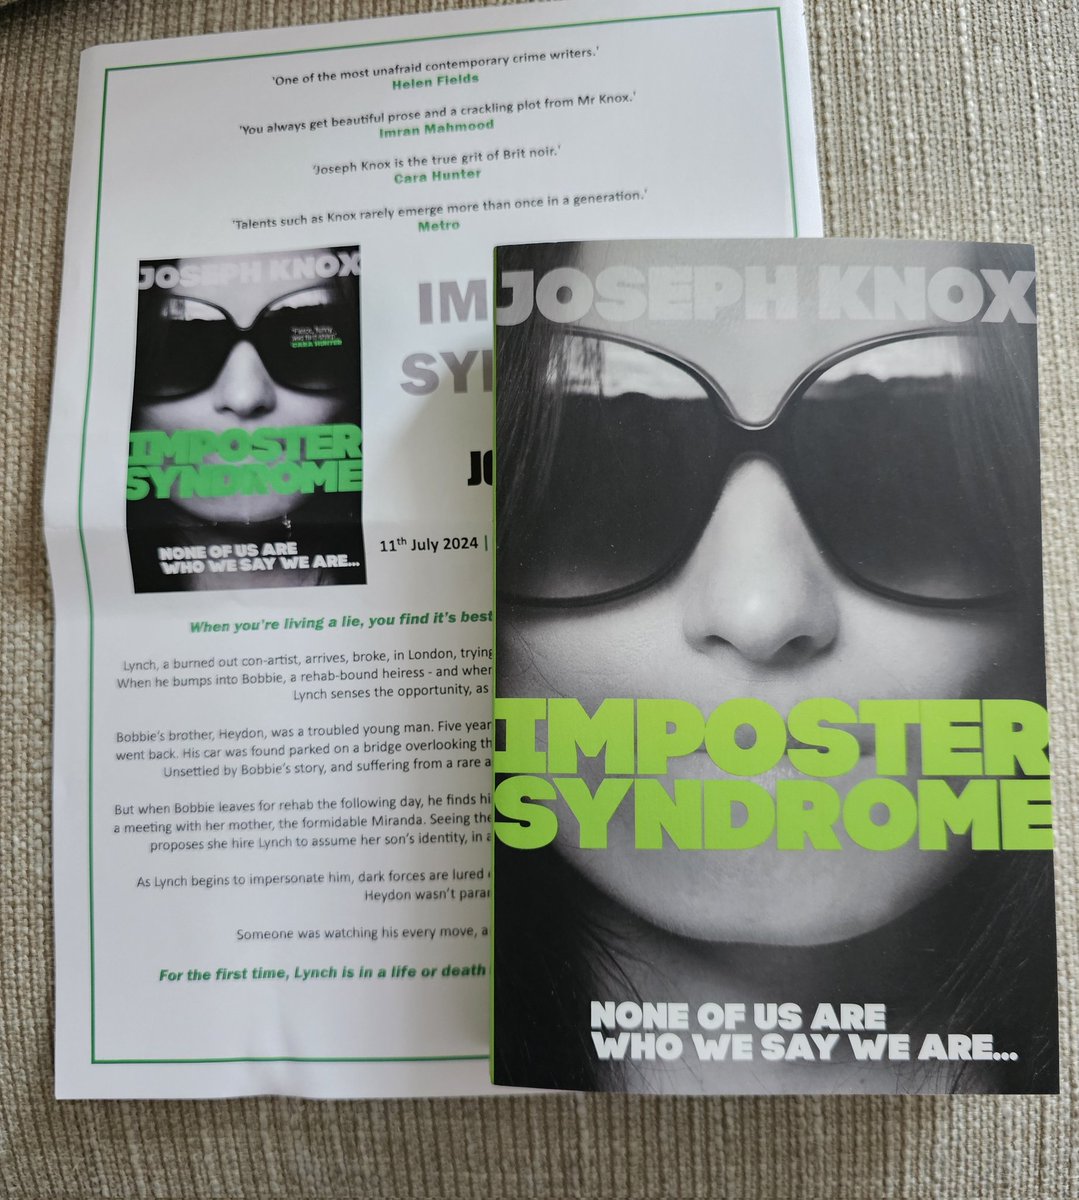 Thank you so much @alisonbarrow and @DoubledayUK for my copy of #ImposterSyndrome by Joseph Knox I can't wait to read this! Published 11th July #bookbloggers #bookX #BookTwitter